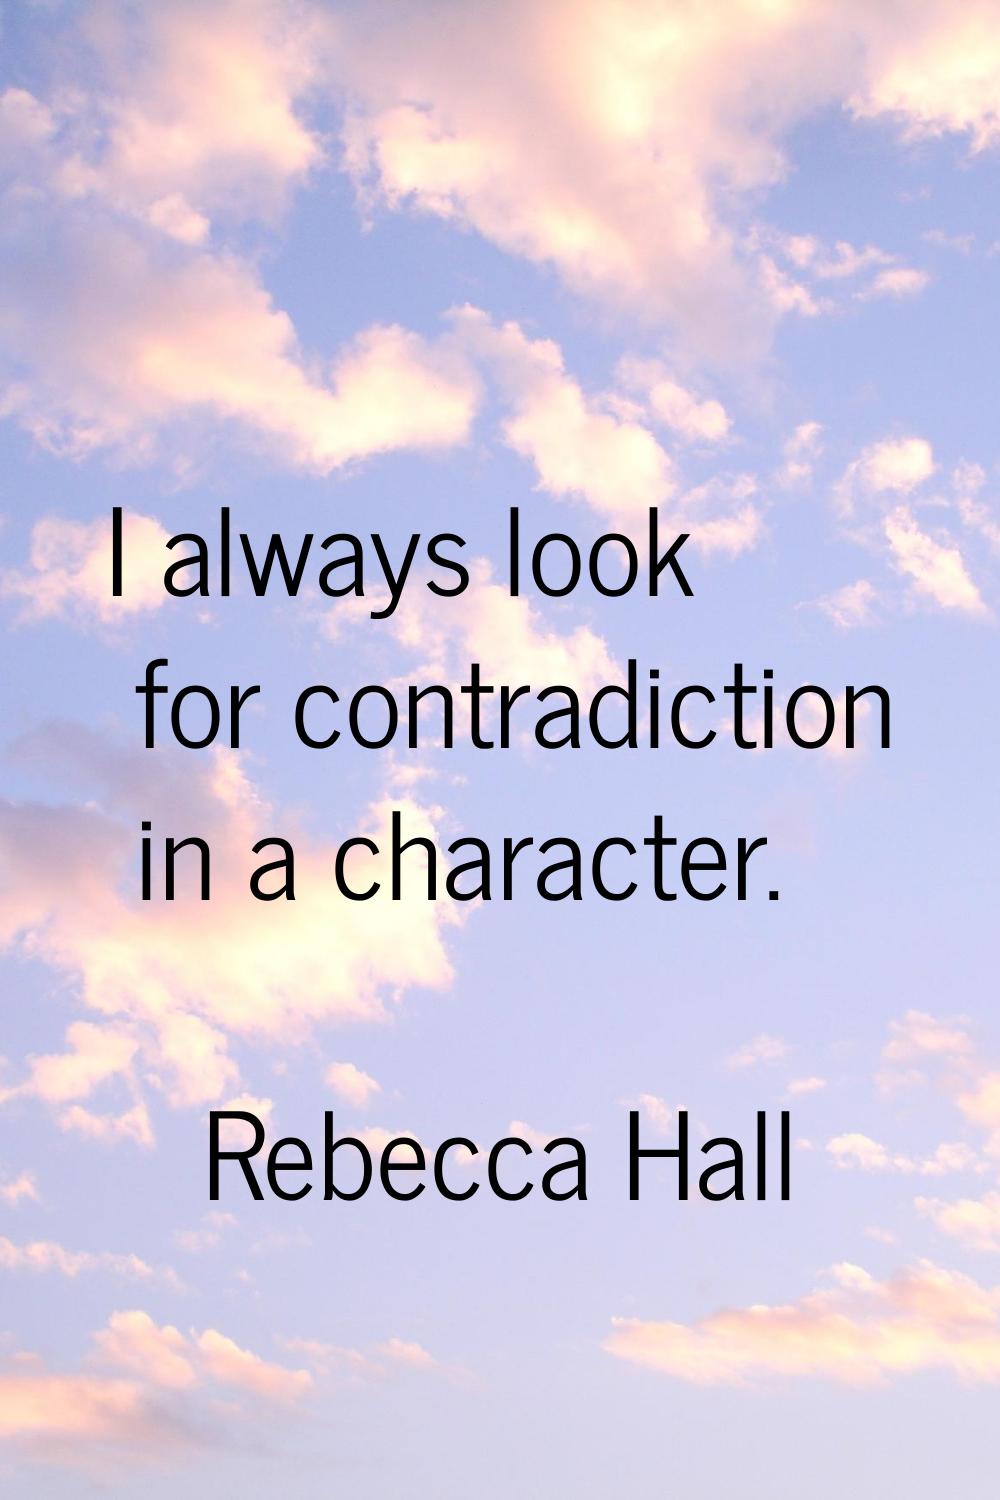 I always look for contradiction in a character.